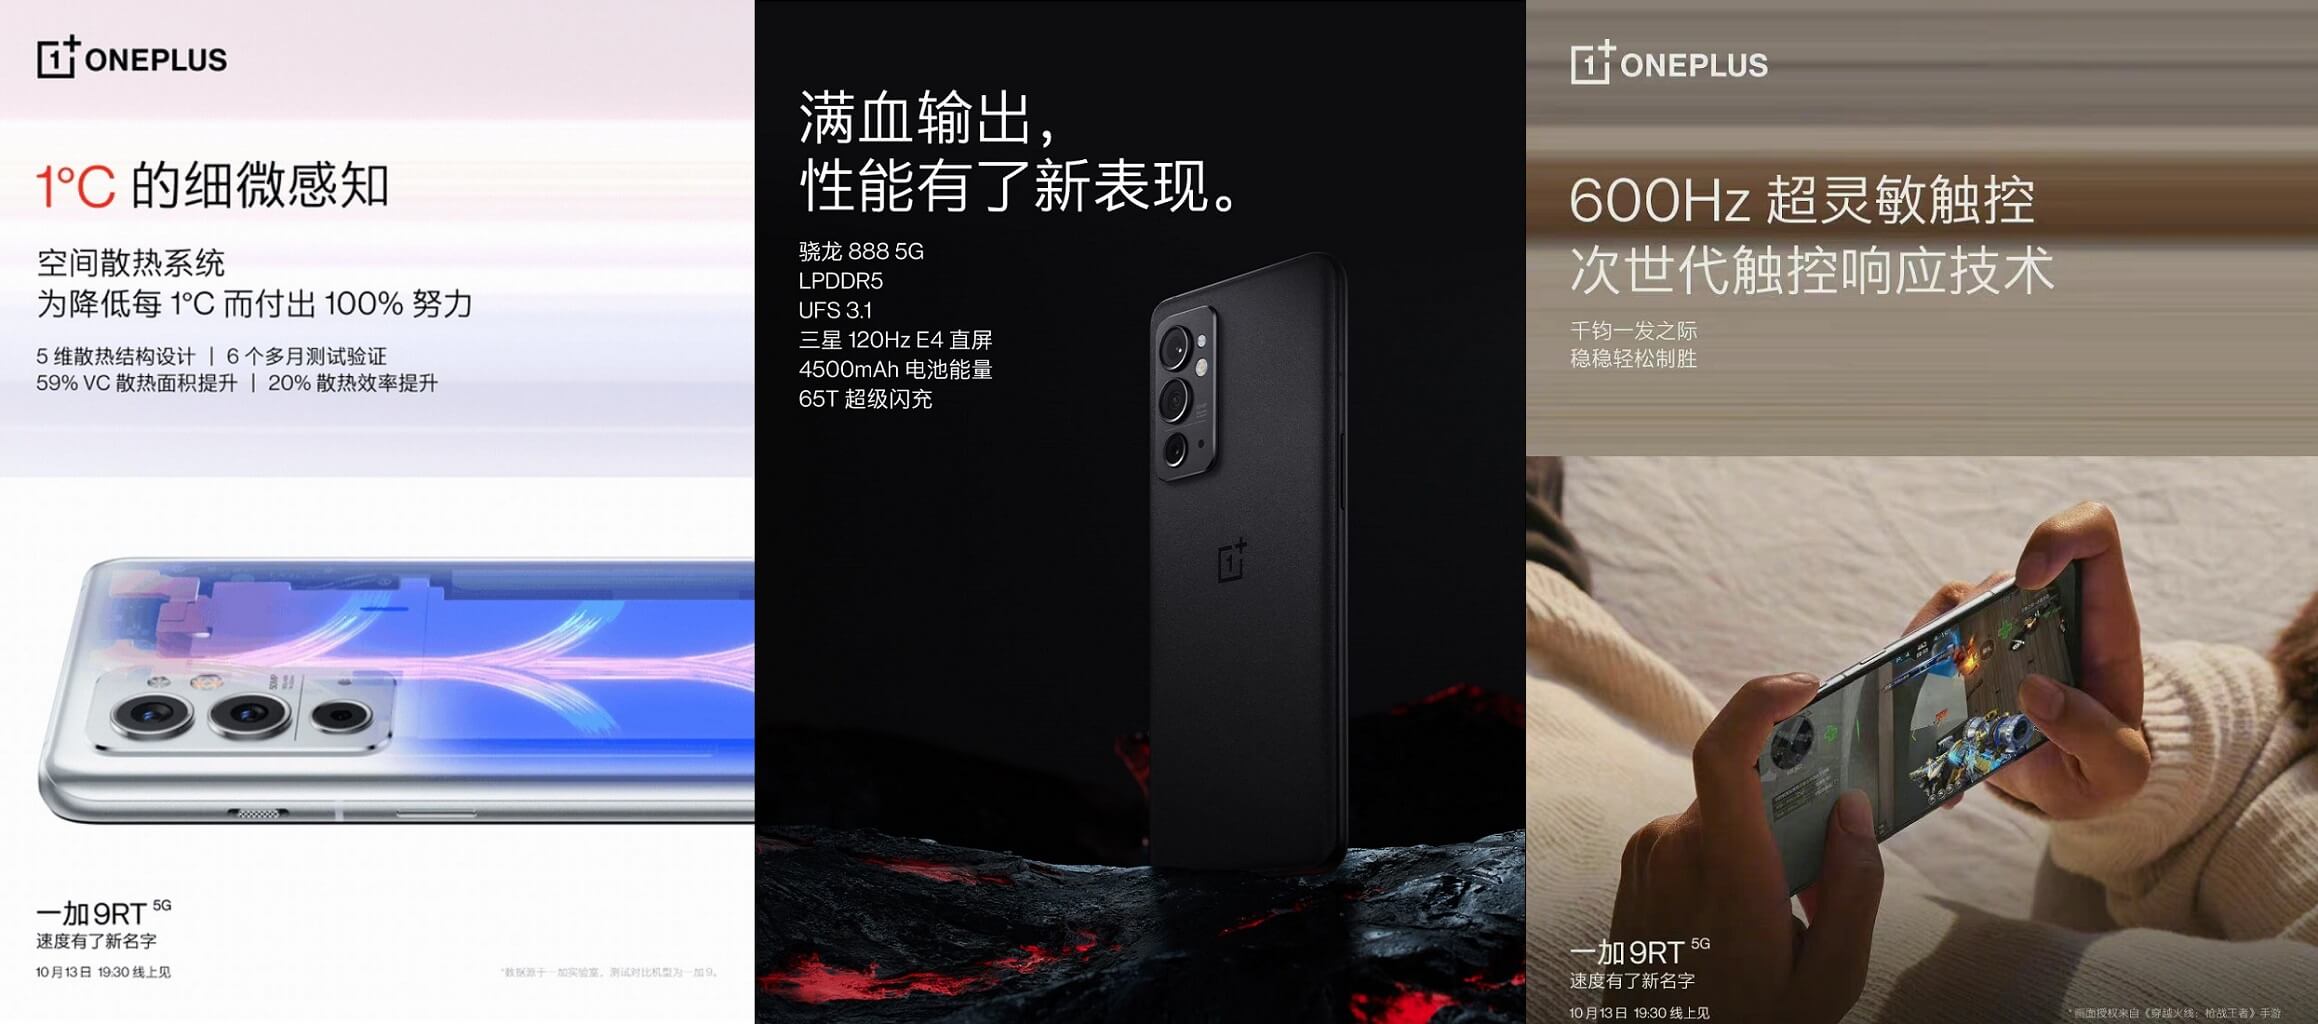 OnePlus 9RT features cn